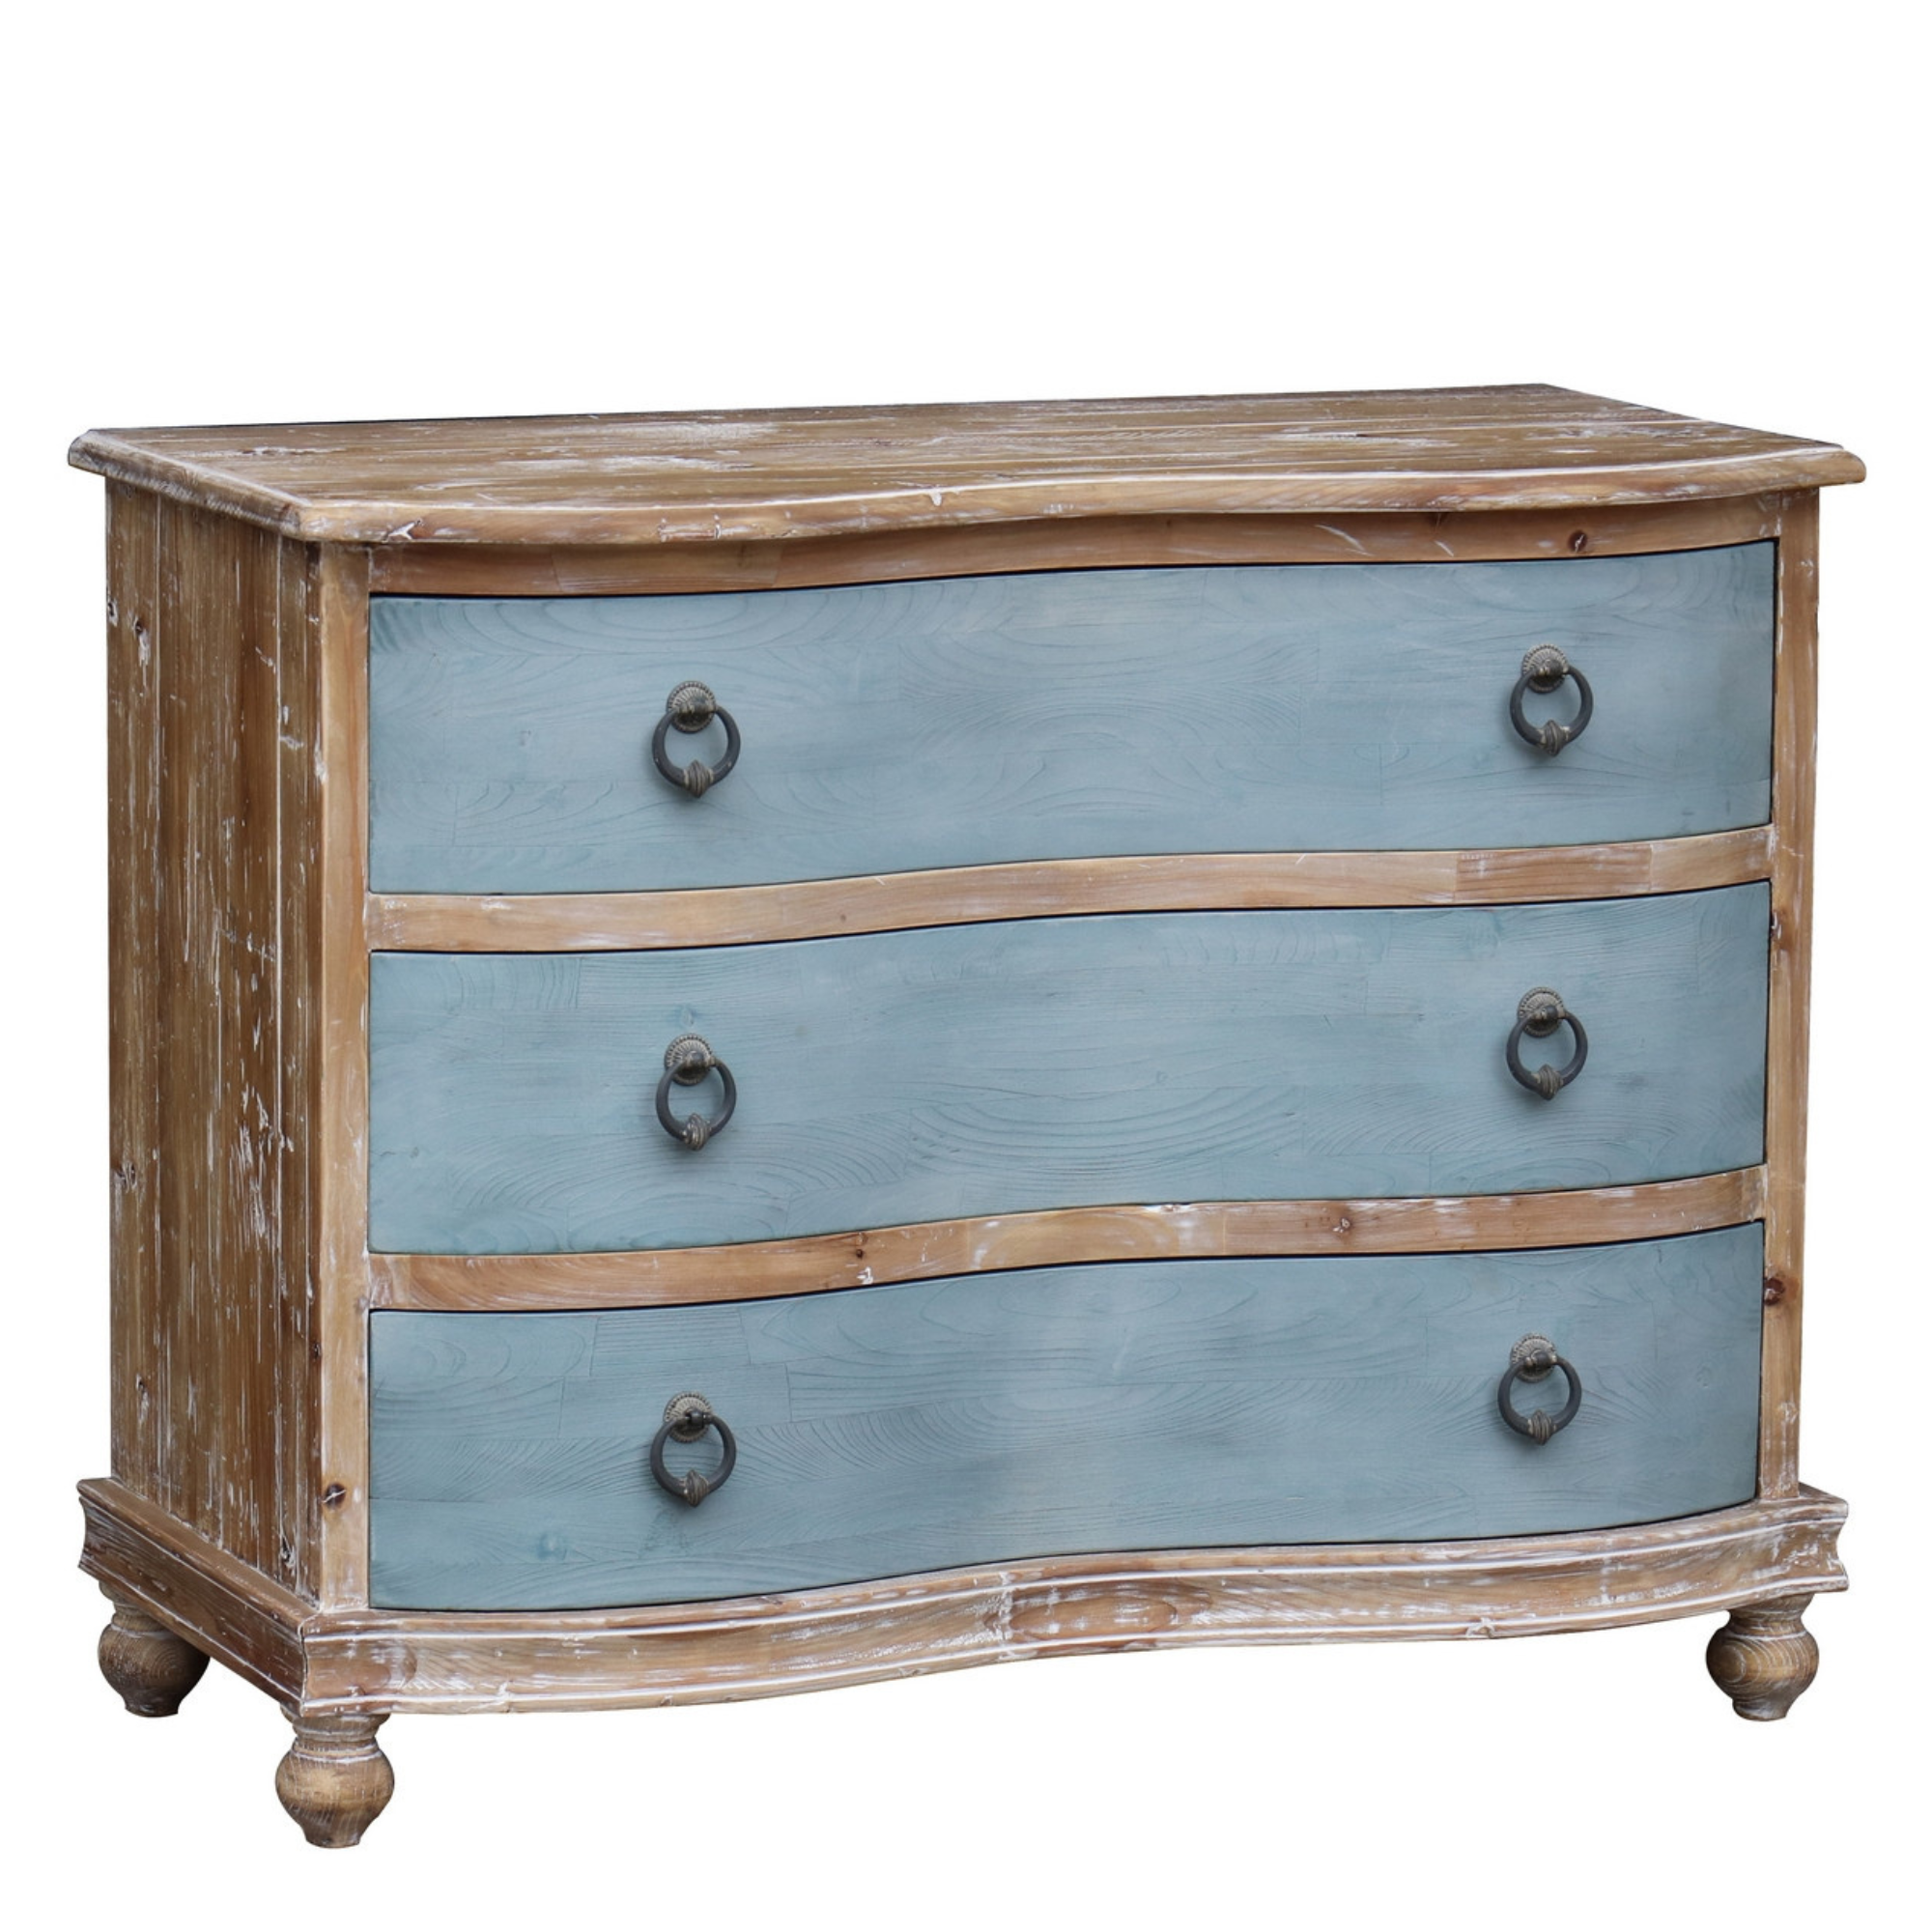 SEASALT BLUE FRENCH COUNTRY CHEST